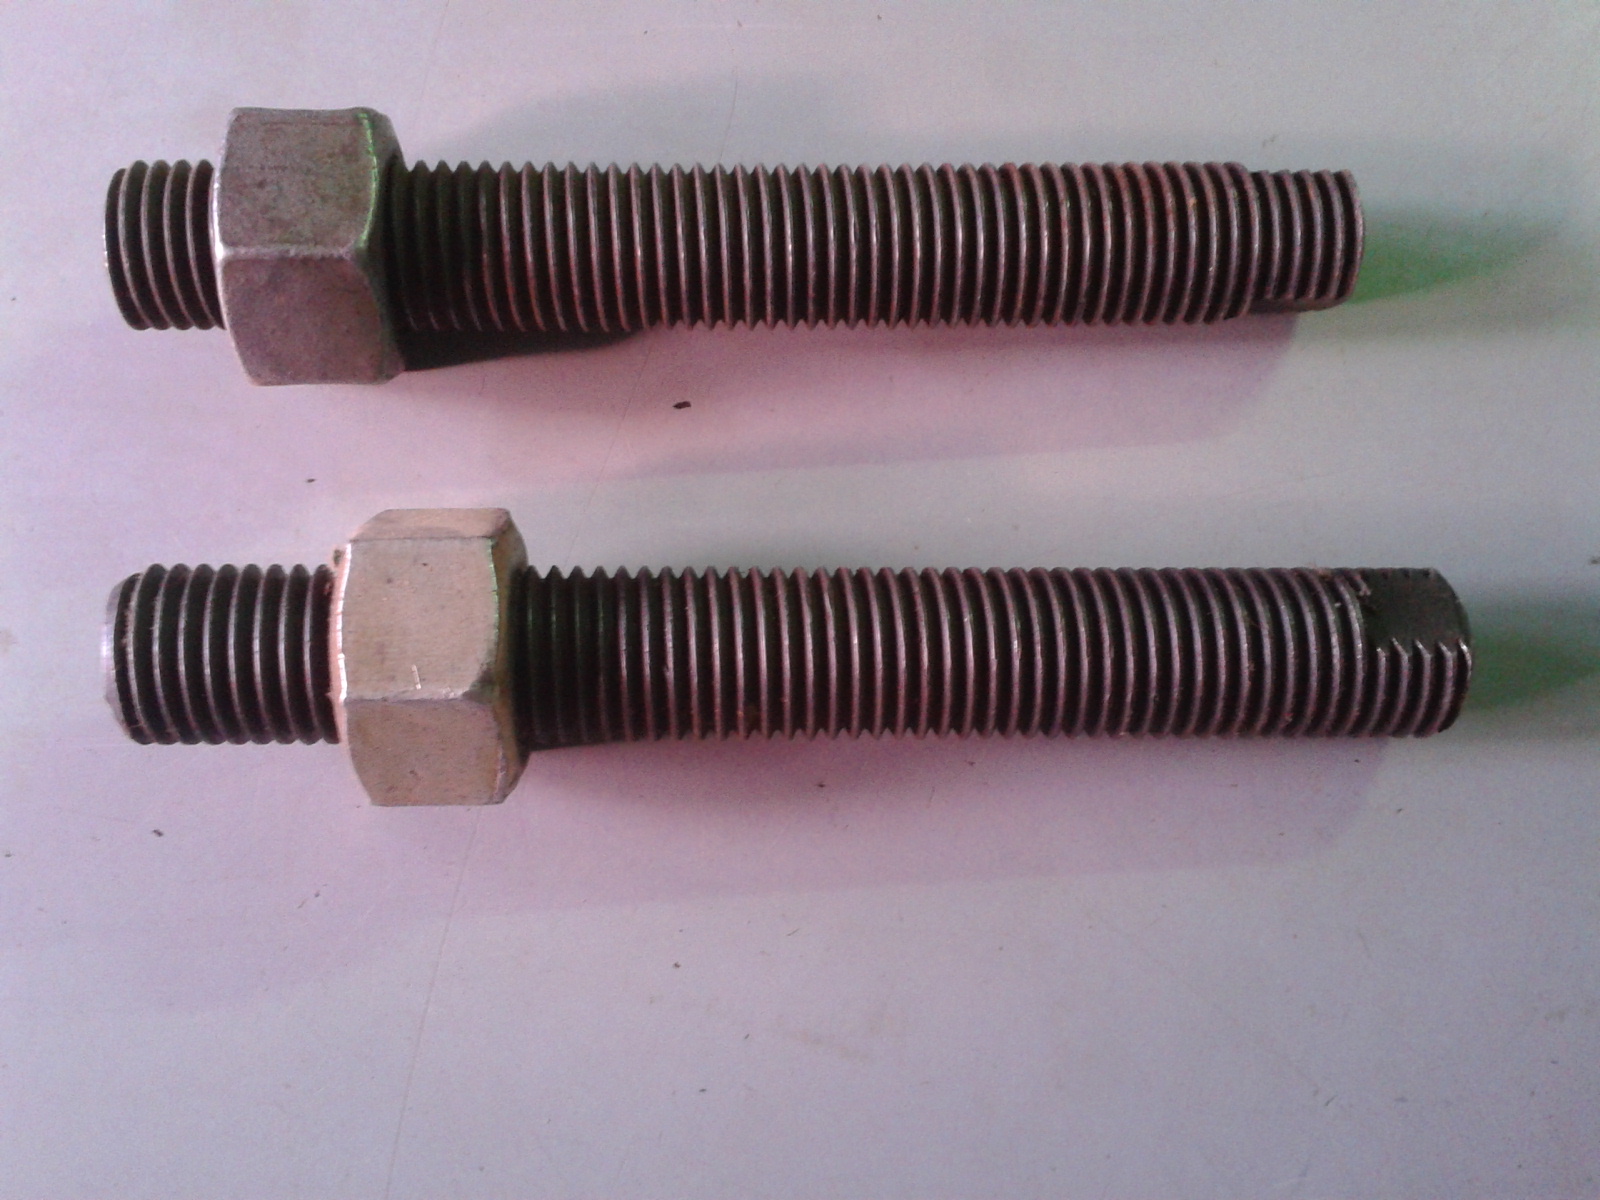 Threaded bars and studs